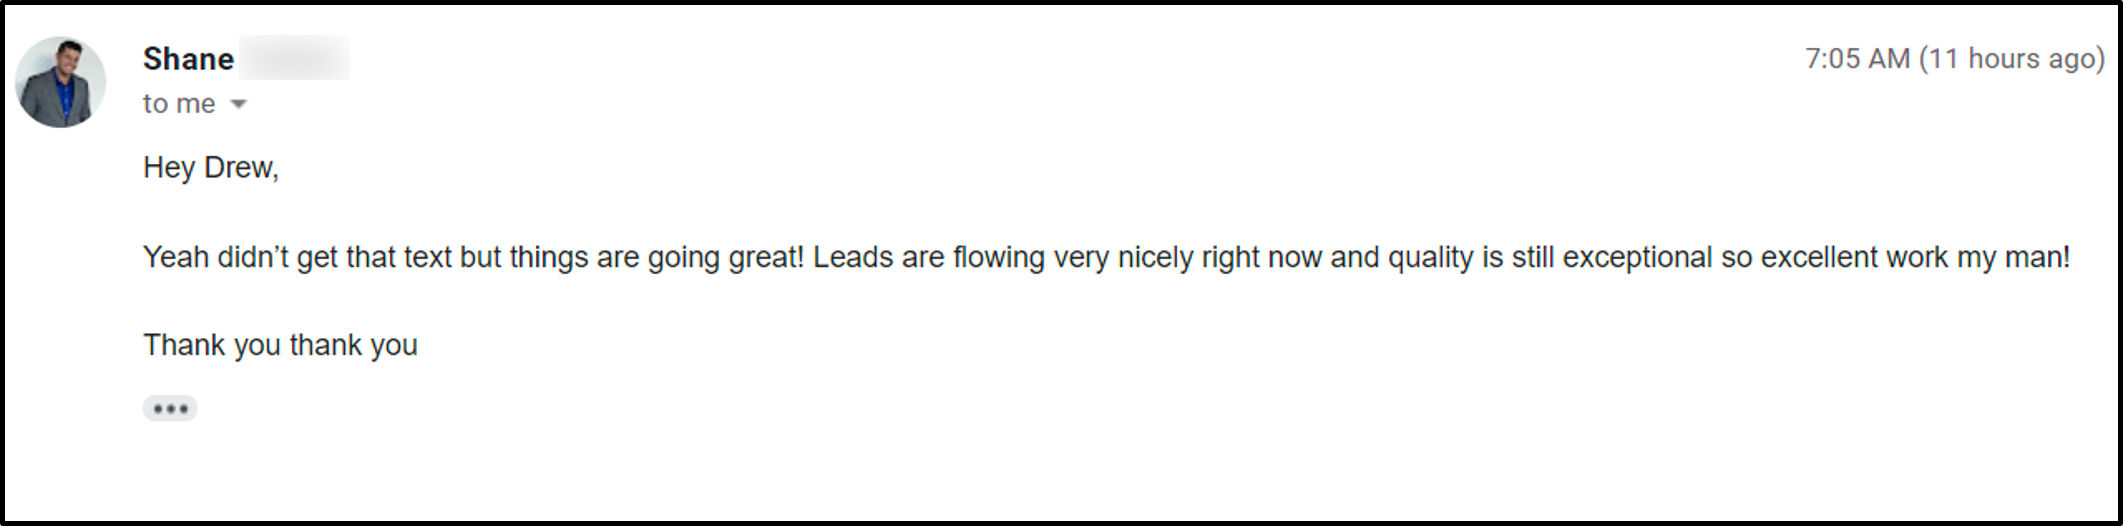 Shane: lead generation results are great thank you